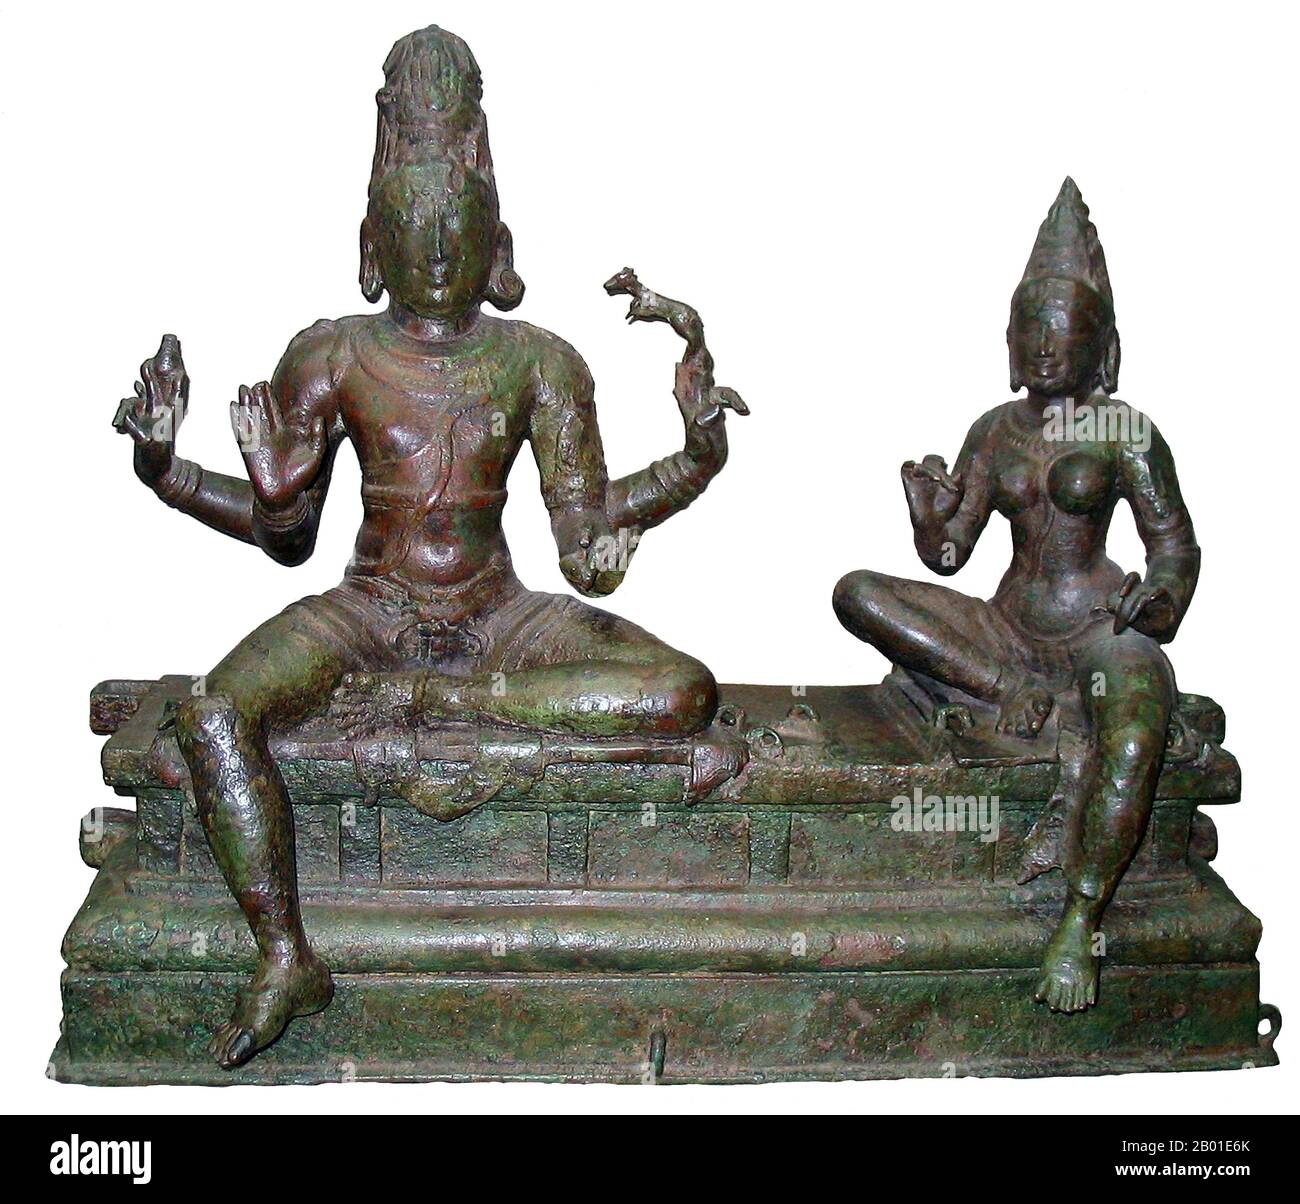 India: Somaskanda (Shiva and his consort Uma), south India, Chola Dynasty, 12th century. Photo by Quadell (CC BY-SA 3.0 License).  Shiva (Sanskrit: शिव Śiva, meaning 'auspicious one' ) is a major Hindu deity, and is the destroyer god or transformer among the Trimurti, the Hindu Trinity of the primary aspects of the divine. In the Shaiva tradition of Hinduism, Shiva is seen as the Supreme God. In the Smarta tradition, he is regarded as one of the five primary forms of God. Followers of Hinduism who focus their worship upon Shiva are called Shaivites or Shaivas (Sanskrit Śaiva). Stock Photo